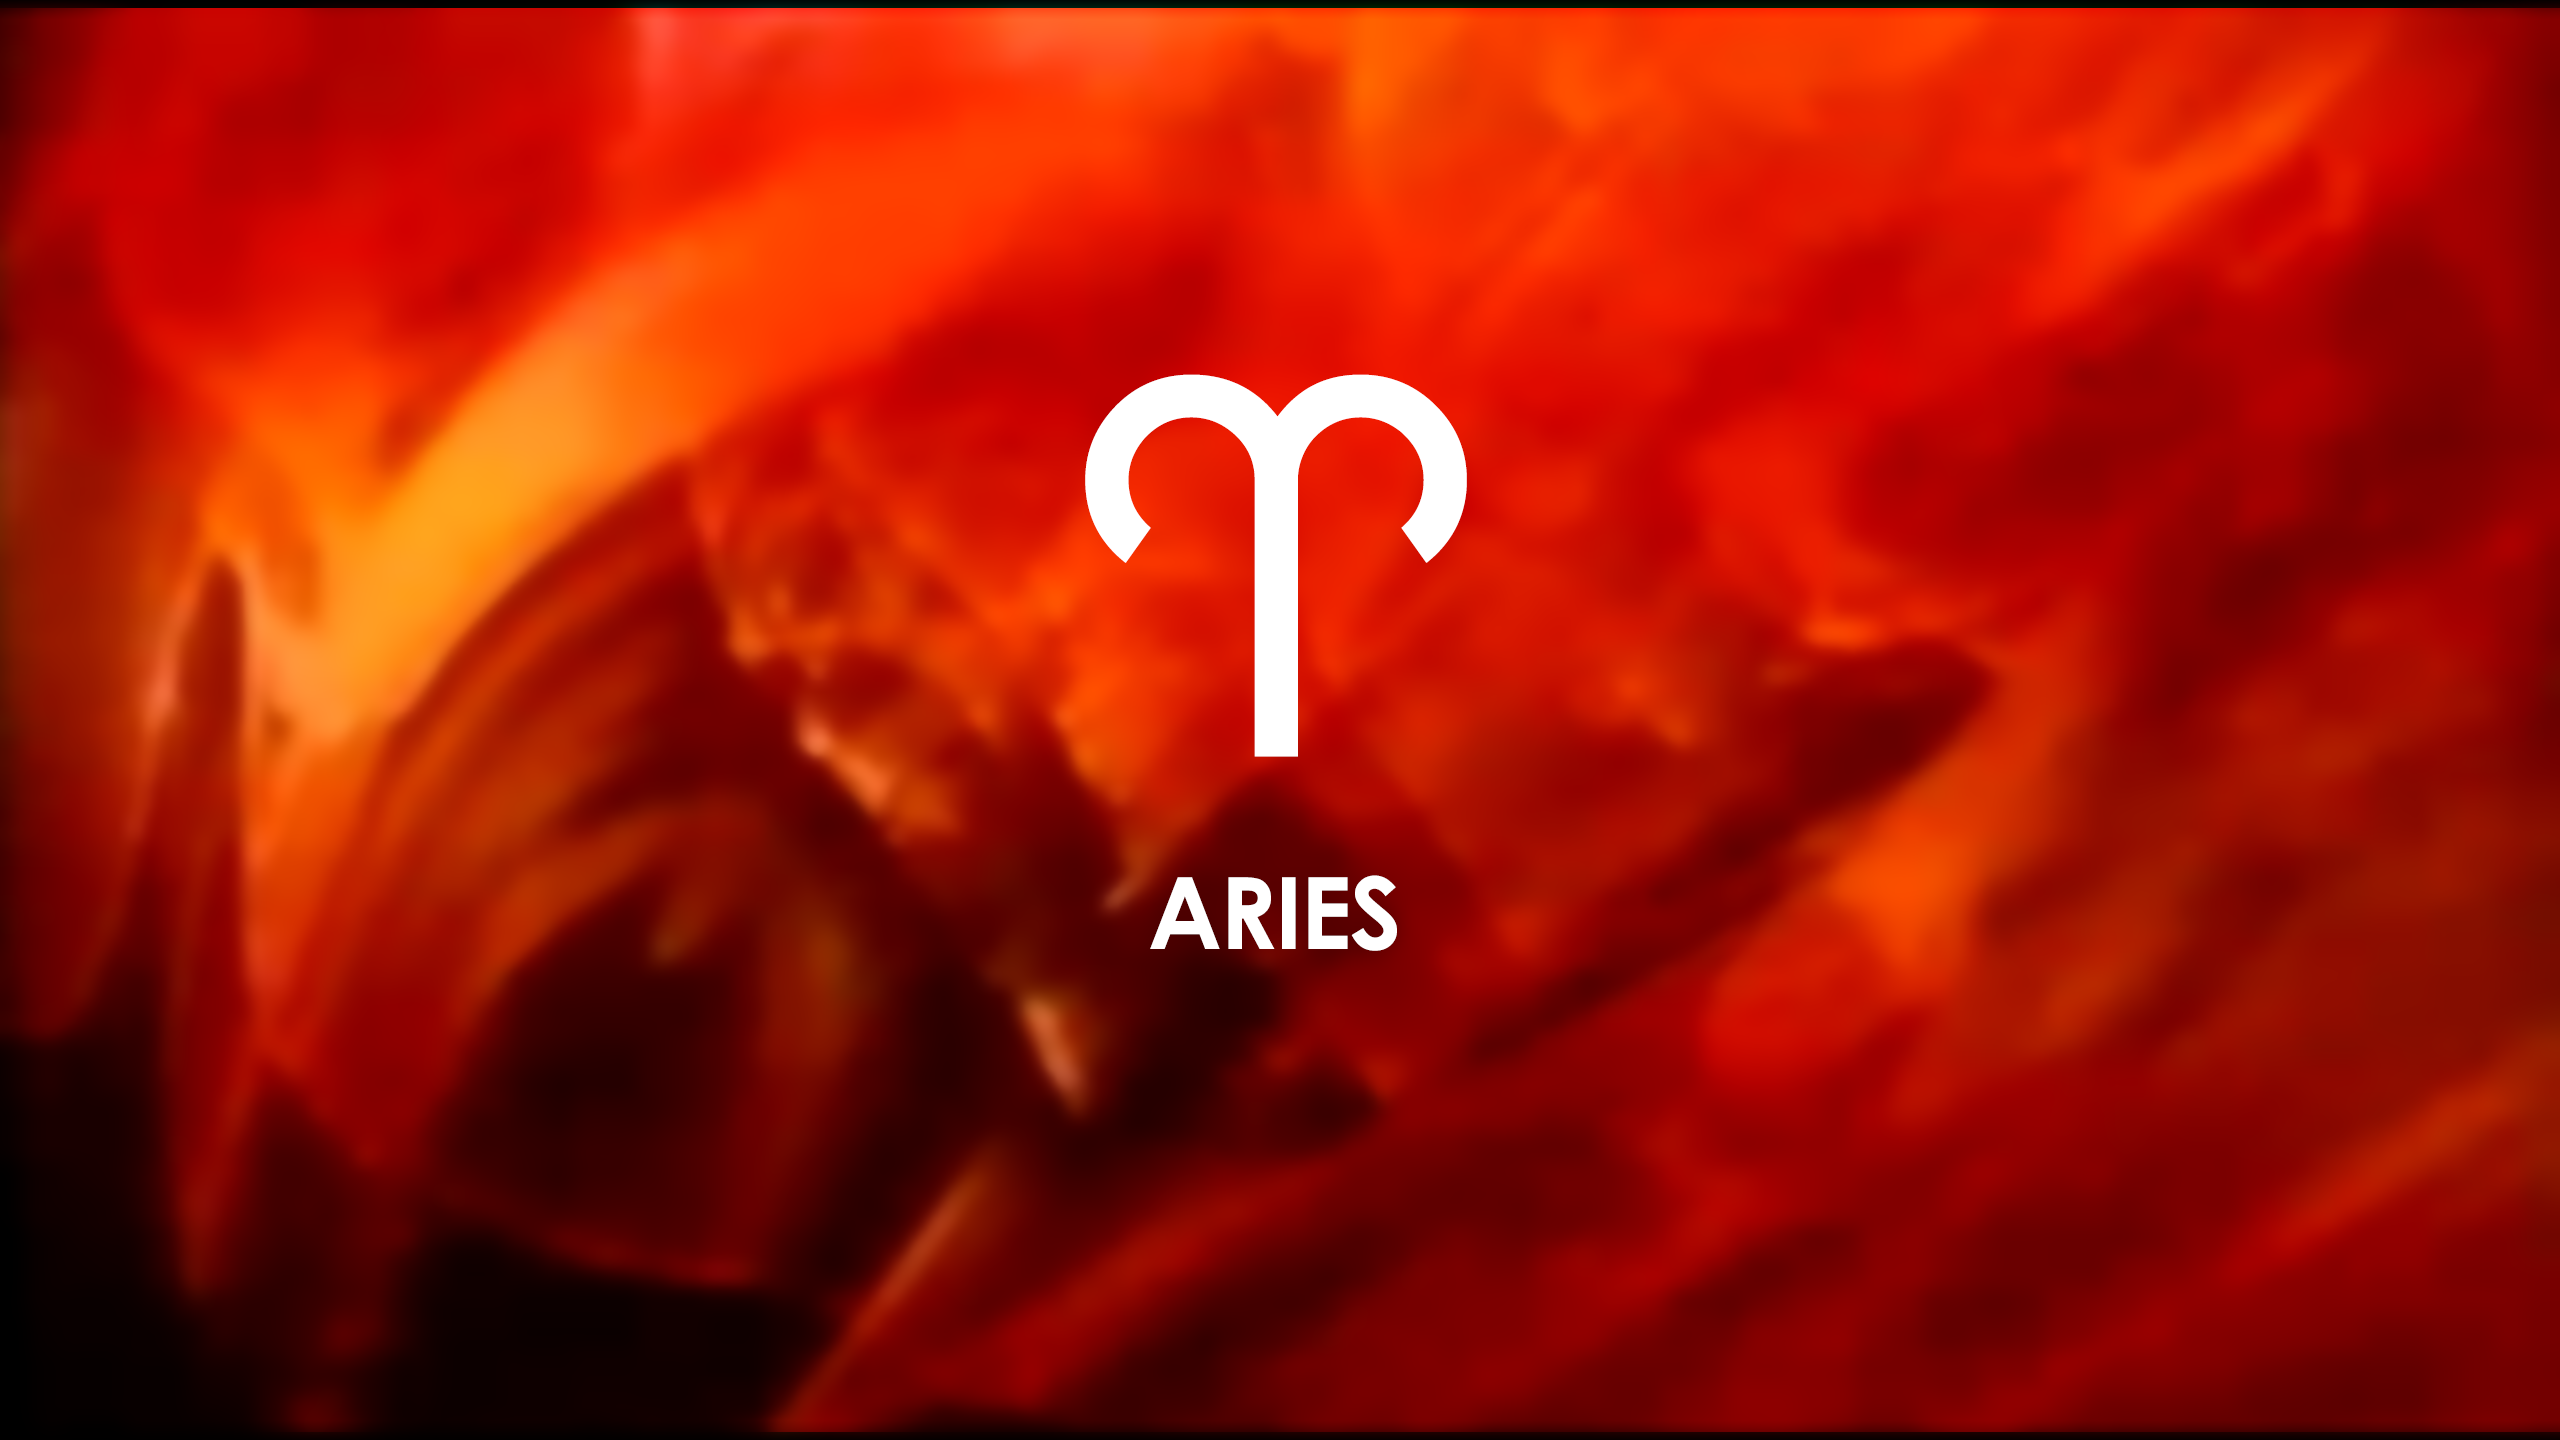 Aries Sign On A Red Background Wallpaper And Image